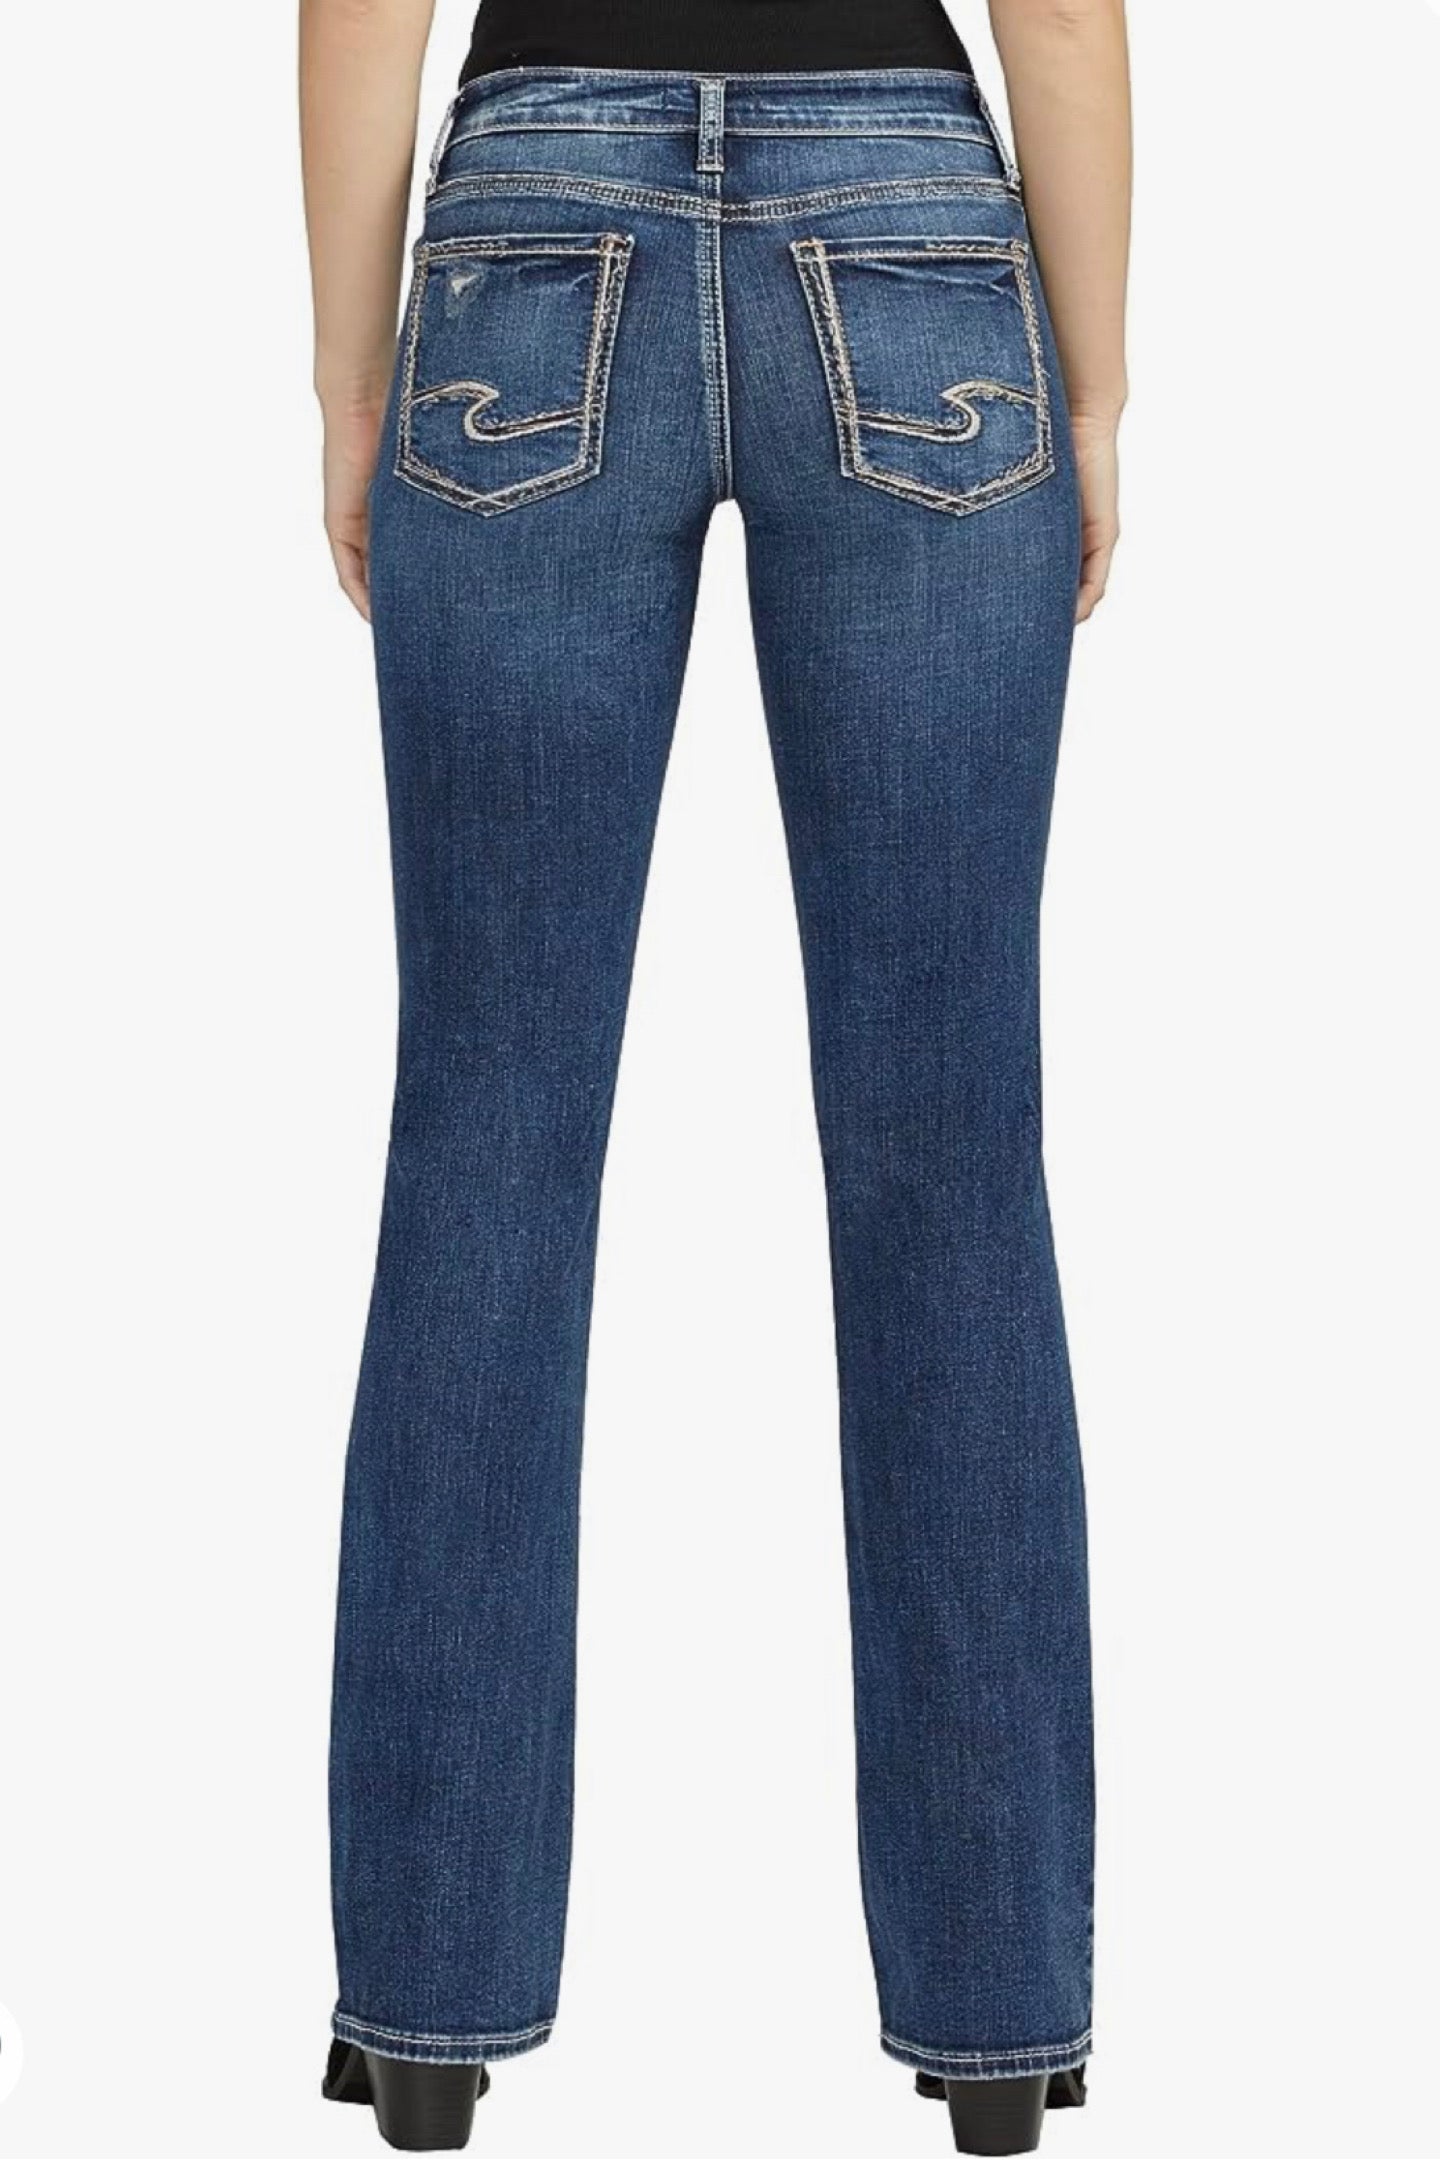 Tuesday Low Rise Slim Bootcut Jean by Silver